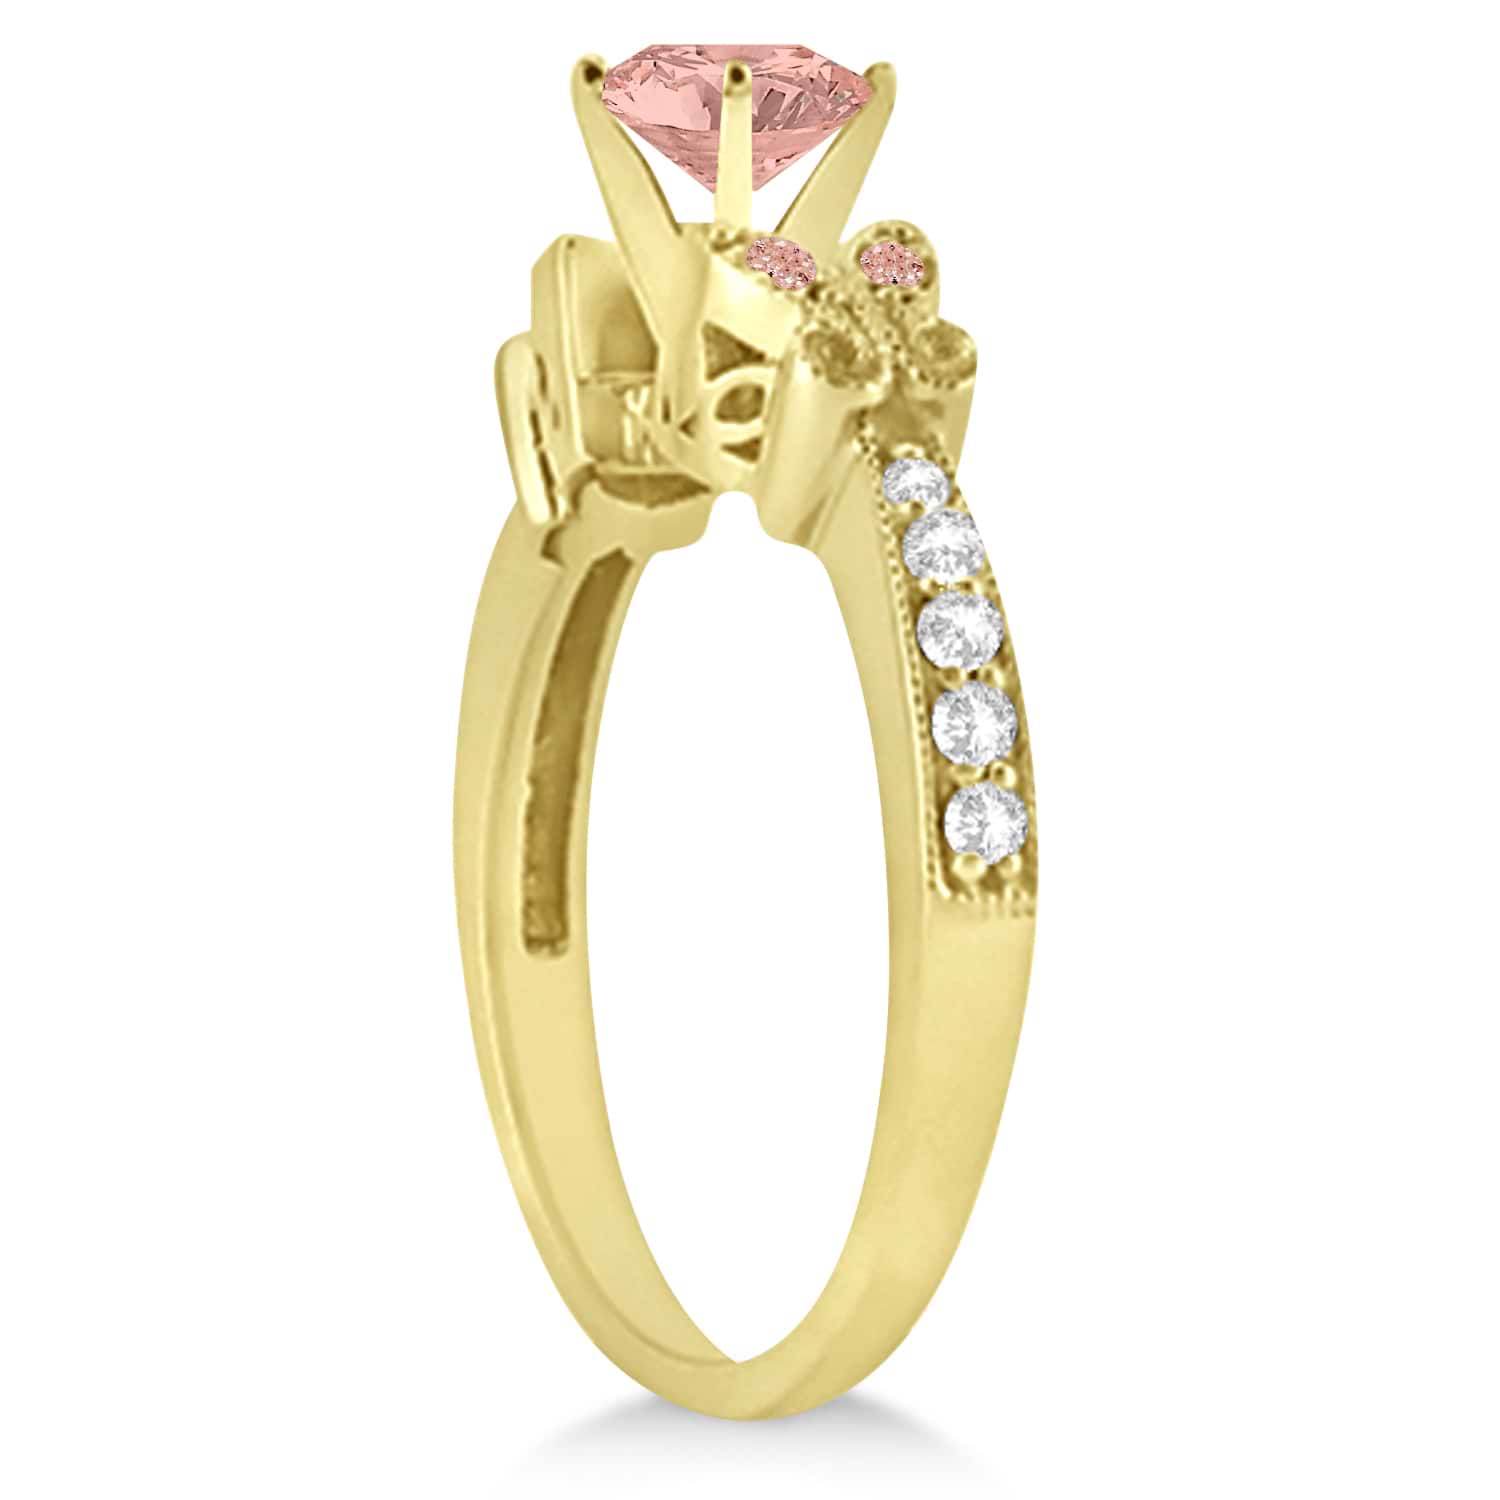 Butterfly Morganite & Diamond Engagement Ring 14K Yellow Gold 1.28ct